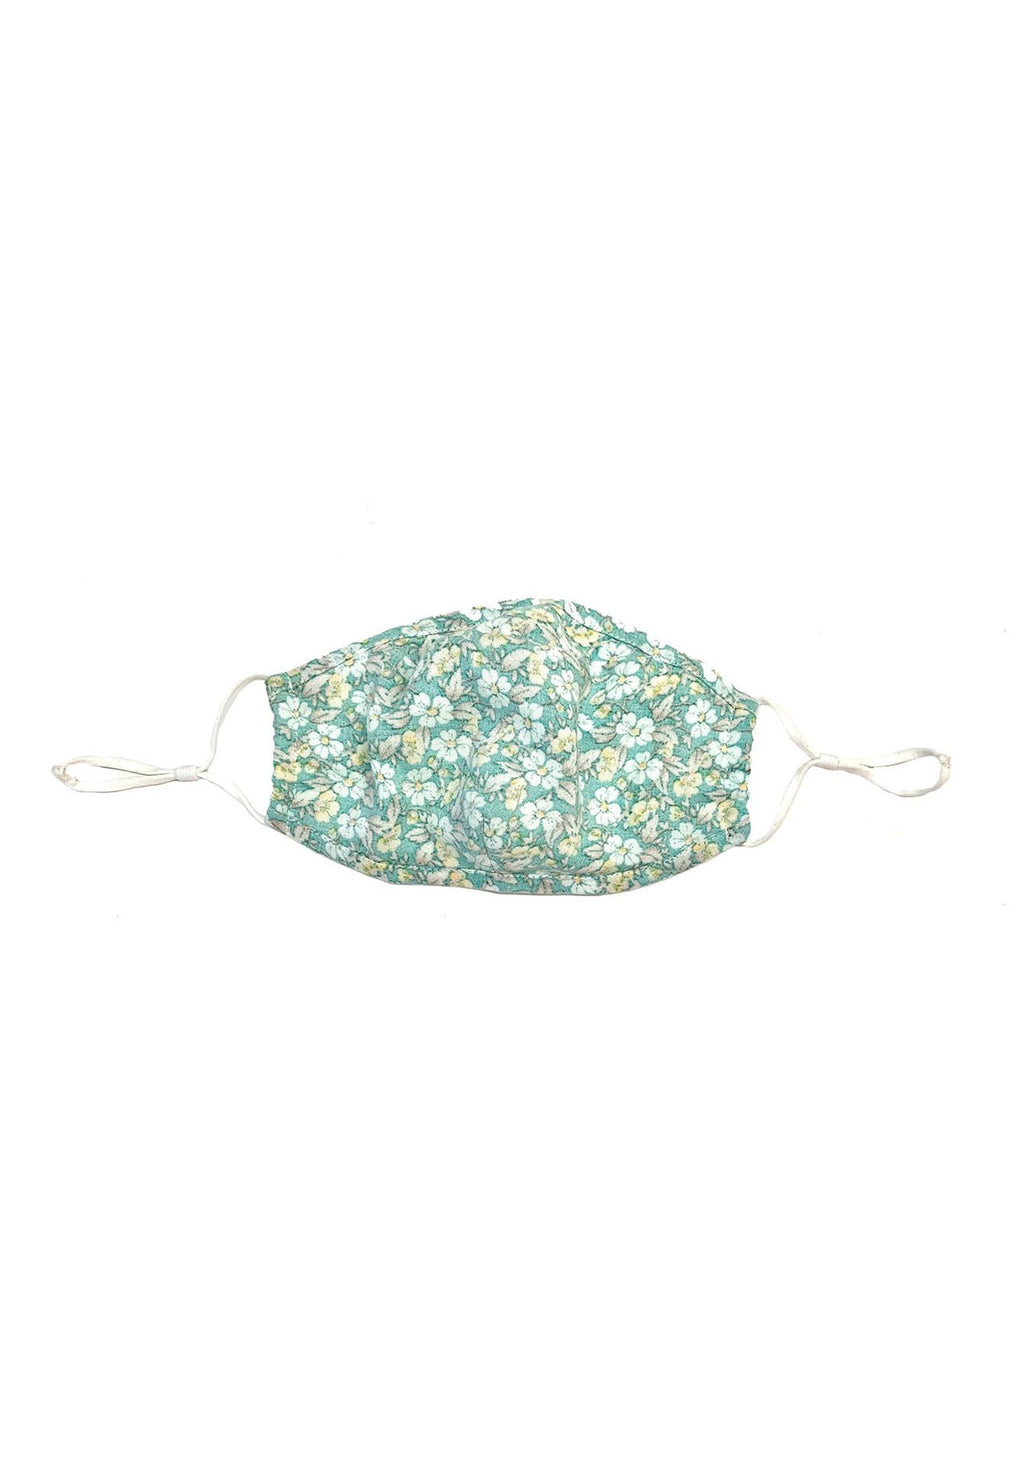 Magnolia Floral Face Mask - Blue Floral (Free Shipping Included on all Merritt Accessories Too) - MERRITT CHARLES